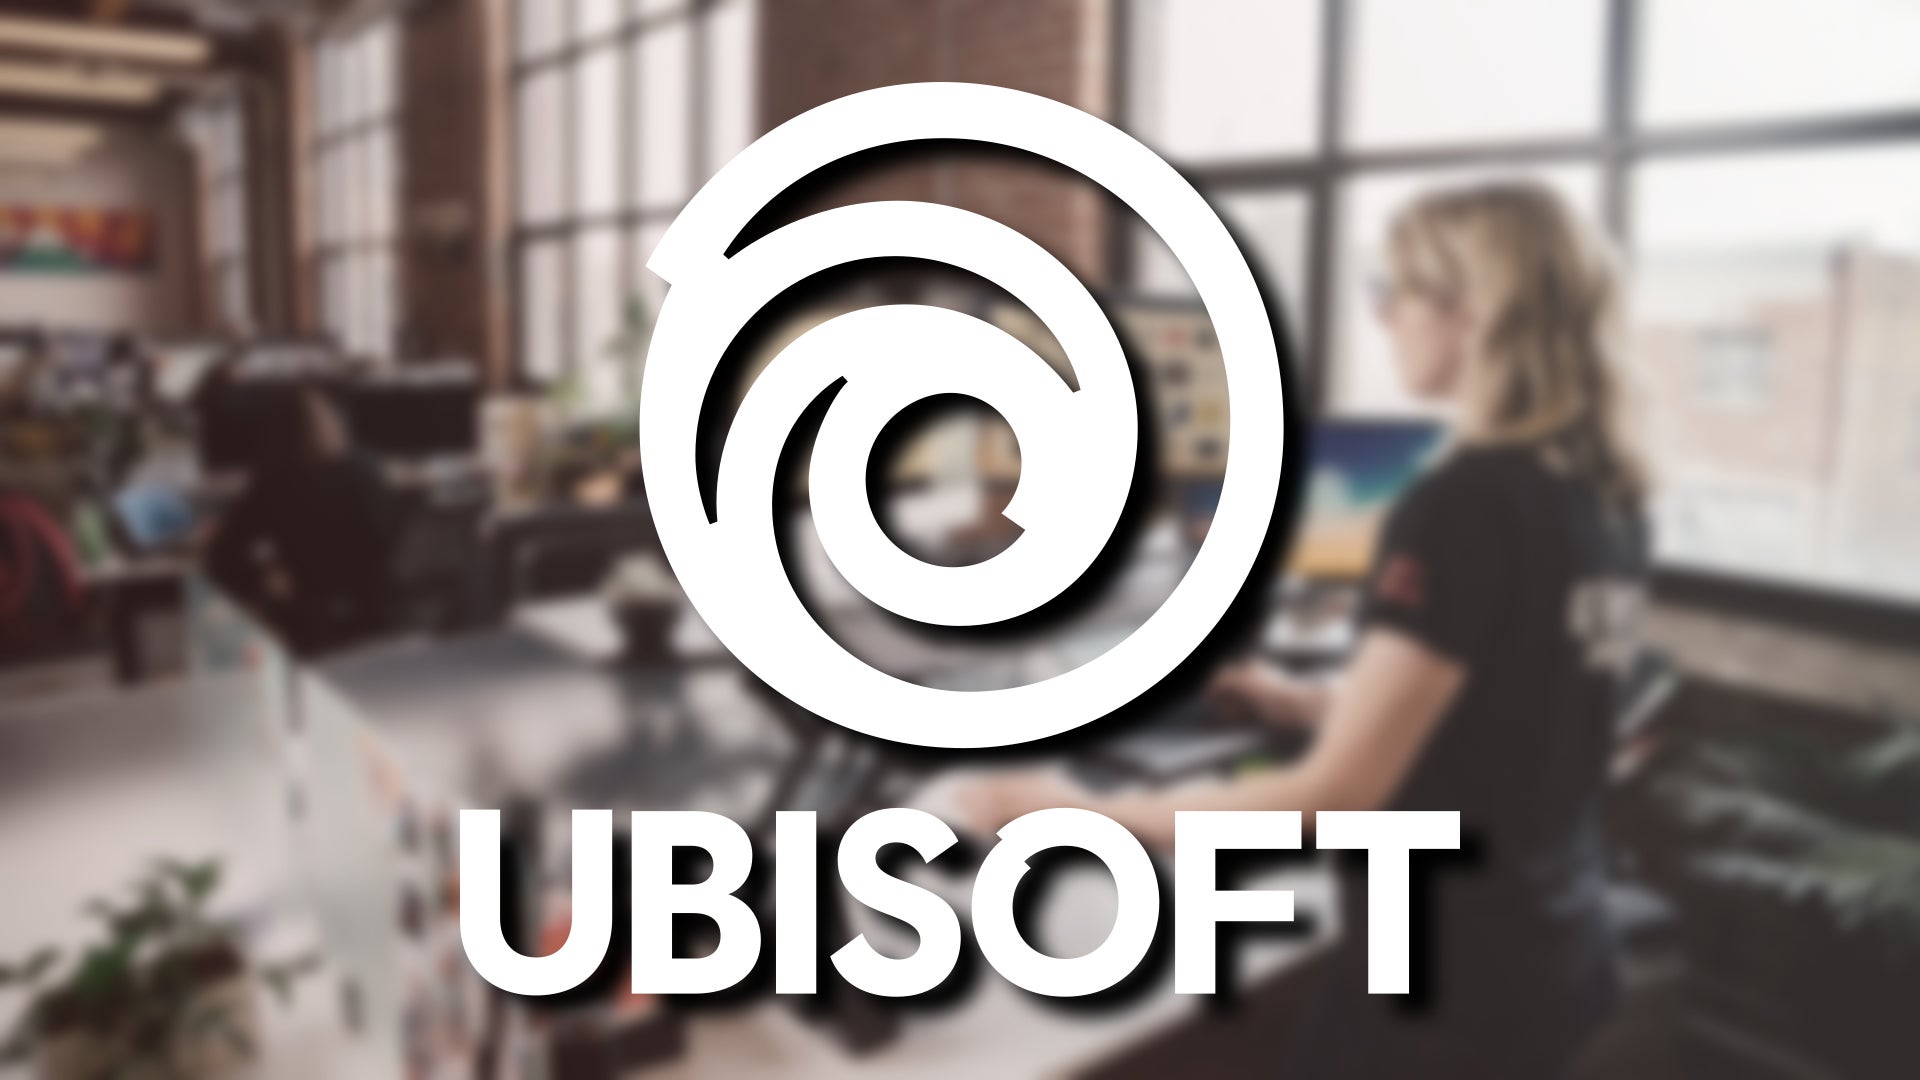 Ubisoft will be at E3 this year... "if" it happens